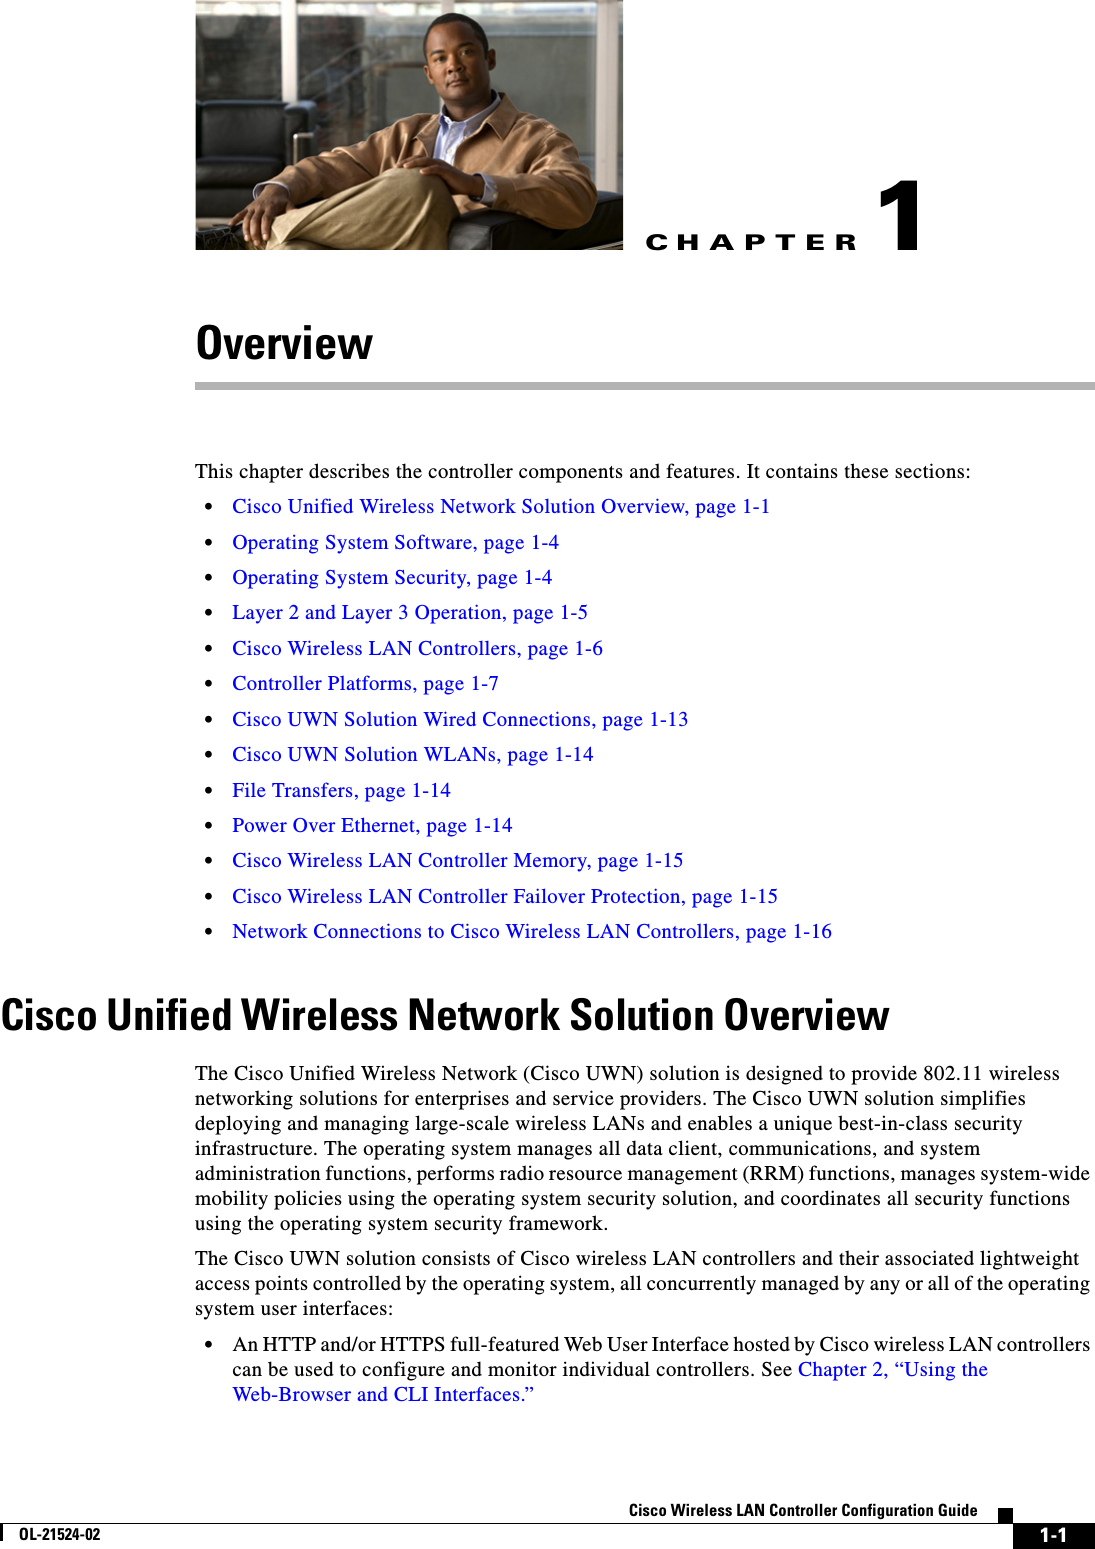 CHAPTER1-1Cisco Wireless LAN Controller Configuration GuideOL-21524-021OverviewThis chapter describes the controller components and features. It contains these sections:  • Cisco Unified Wireless Network Solution Overview, page 1-1  • Operating System Software, page 1-4  • Operating System Security, page 1-4  • Layer 2 and Layer 3 Operation, page 1-5  • Cisco Wireless LAN Controllers, page 1-6  • Controller Platforms, page 1-7  • Cisco UWN Solution Wired Connections, page 1-13  • Cisco UWN Solution WLANs, page 1-14  • File Transfers, page 1-14  • Power Over Ethernet, page 1-14  • Cisco Wireless LAN Controller Memory, page 1-15  • Cisco Wireless LAN Controller Failover Protection, page 1-15  • Network Connections to Cisco Wireless LAN Controllers, page 1-16Cisco Unified Wireless Network Solution OverviewThe Cisco Unified Wireless Network (Cisco UWN) solution is designed to provide 802.11 wireless networking solutions for enterprises and service providers. The Cisco UWN solution simplifies deploying and managing large-scale wireless LANs and enables a unique best-in-class security infrastructure. The operating system manages all data client, communications, and system administration functions, performs radio resource management (RRM) functions, manages system-wide mobility policies using the operating system security solution, and coordinates all security functions using the operating system security framework. The Cisco UWN solution consists of Cisco wireless LAN controllers and their associated lightweight access points controlled by the operating system, all concurrently managed by any or all of the operating system user interfaces:  • An HTTP and/or HTTPS full-featured Web User Interface hosted by Cisco wireless LAN controllers can be used to configure and monitor individual controllers. See Chapter 2, “Using the Web-Browser and CLI Interfaces.”